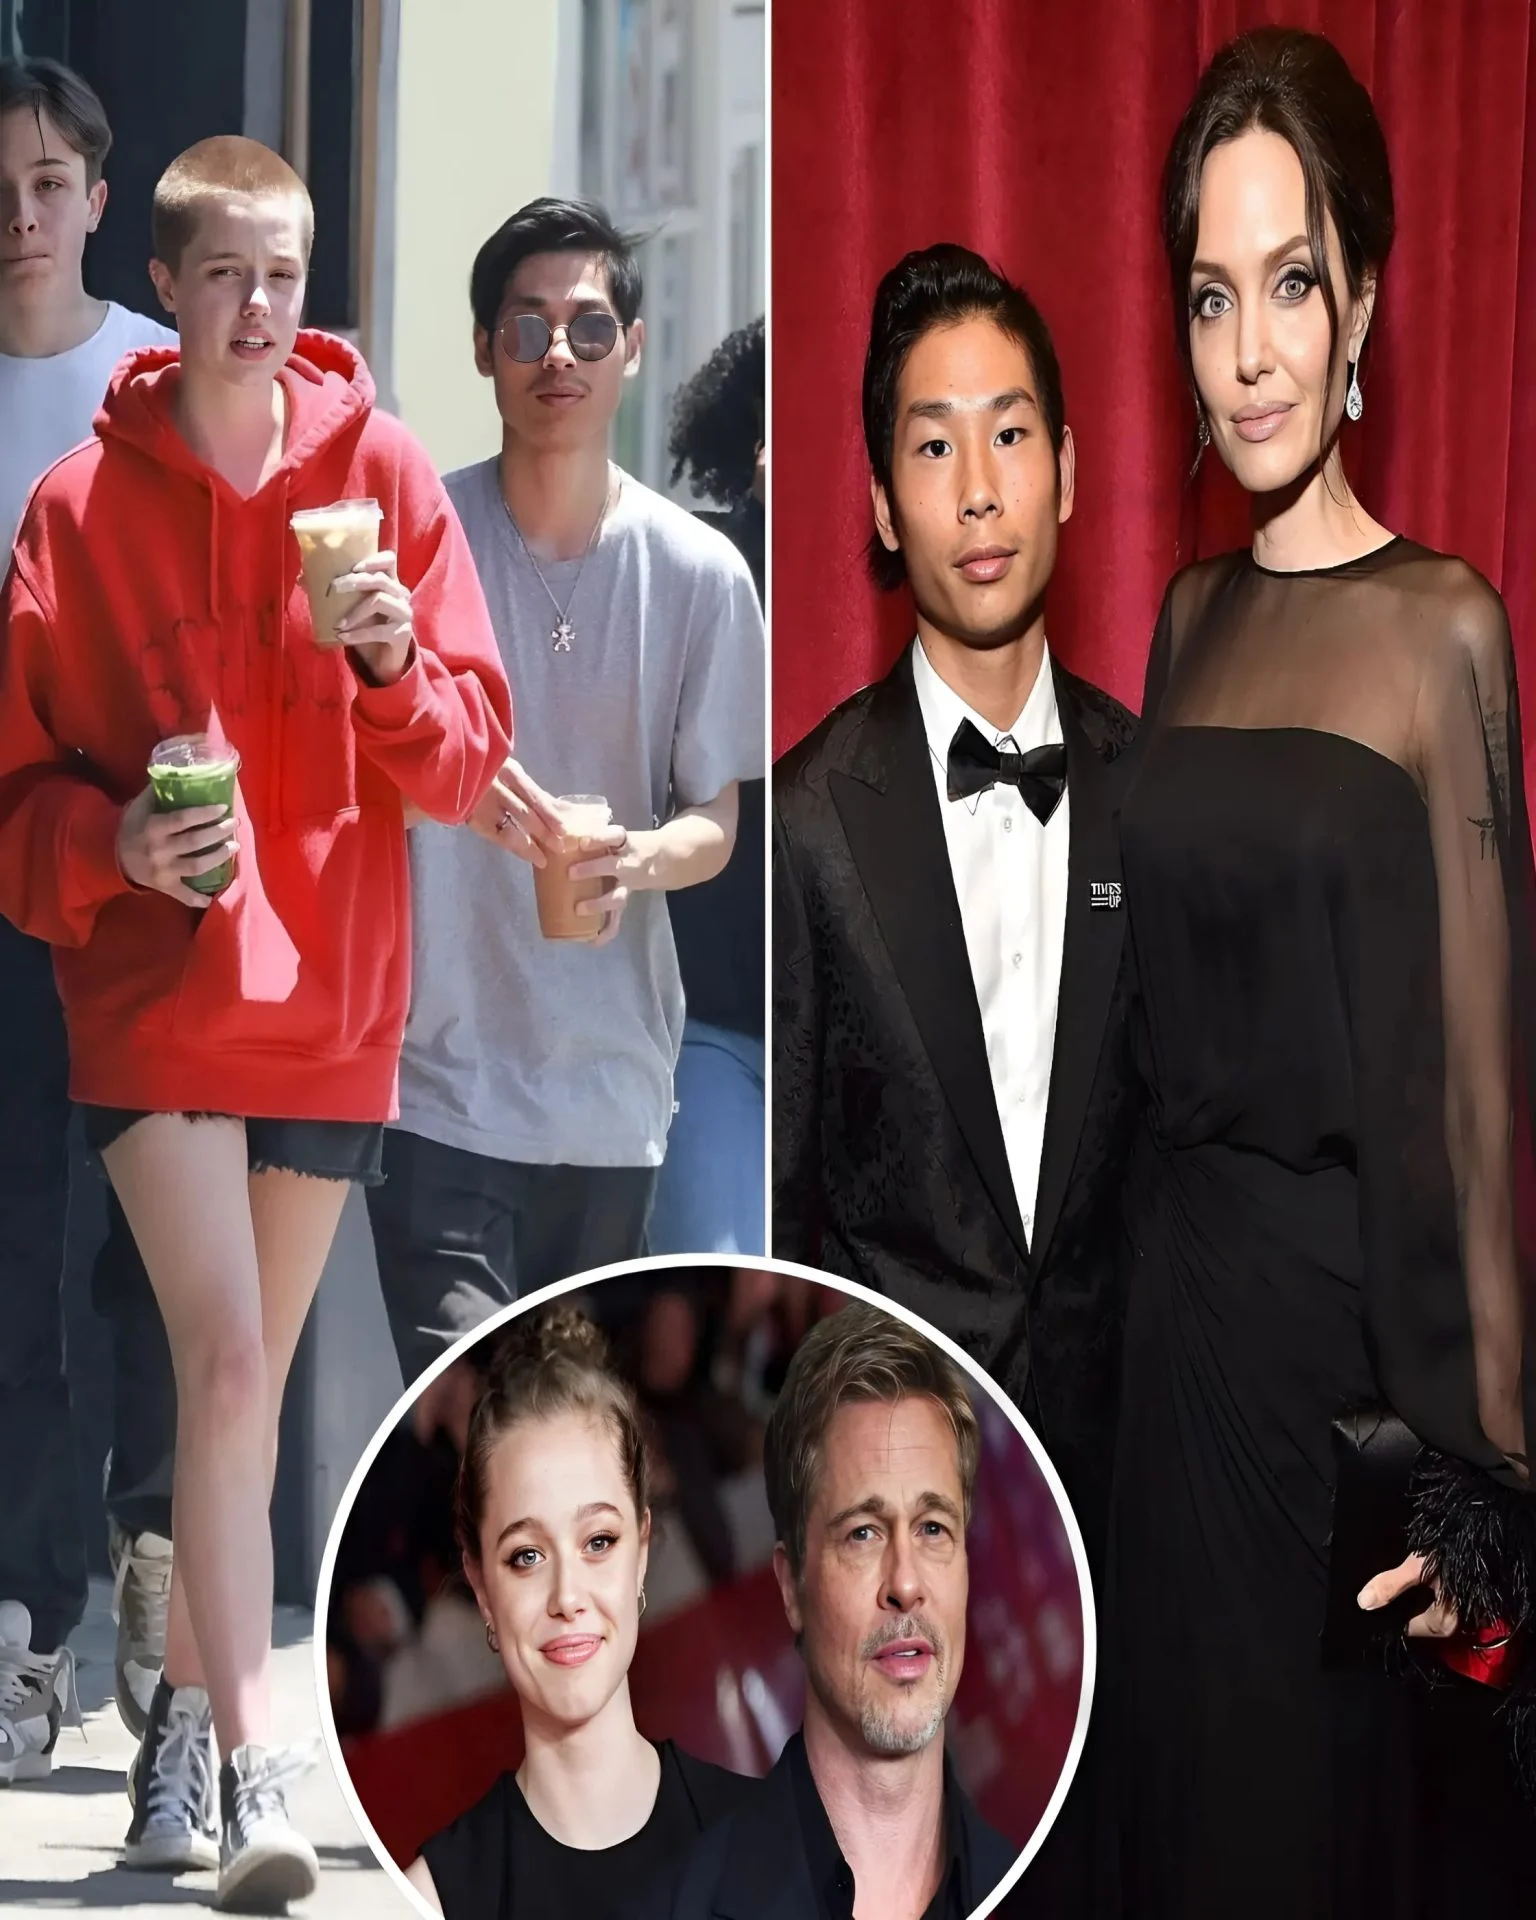 Brad Pitt’s biological daughter issued a statement against Pax Thien